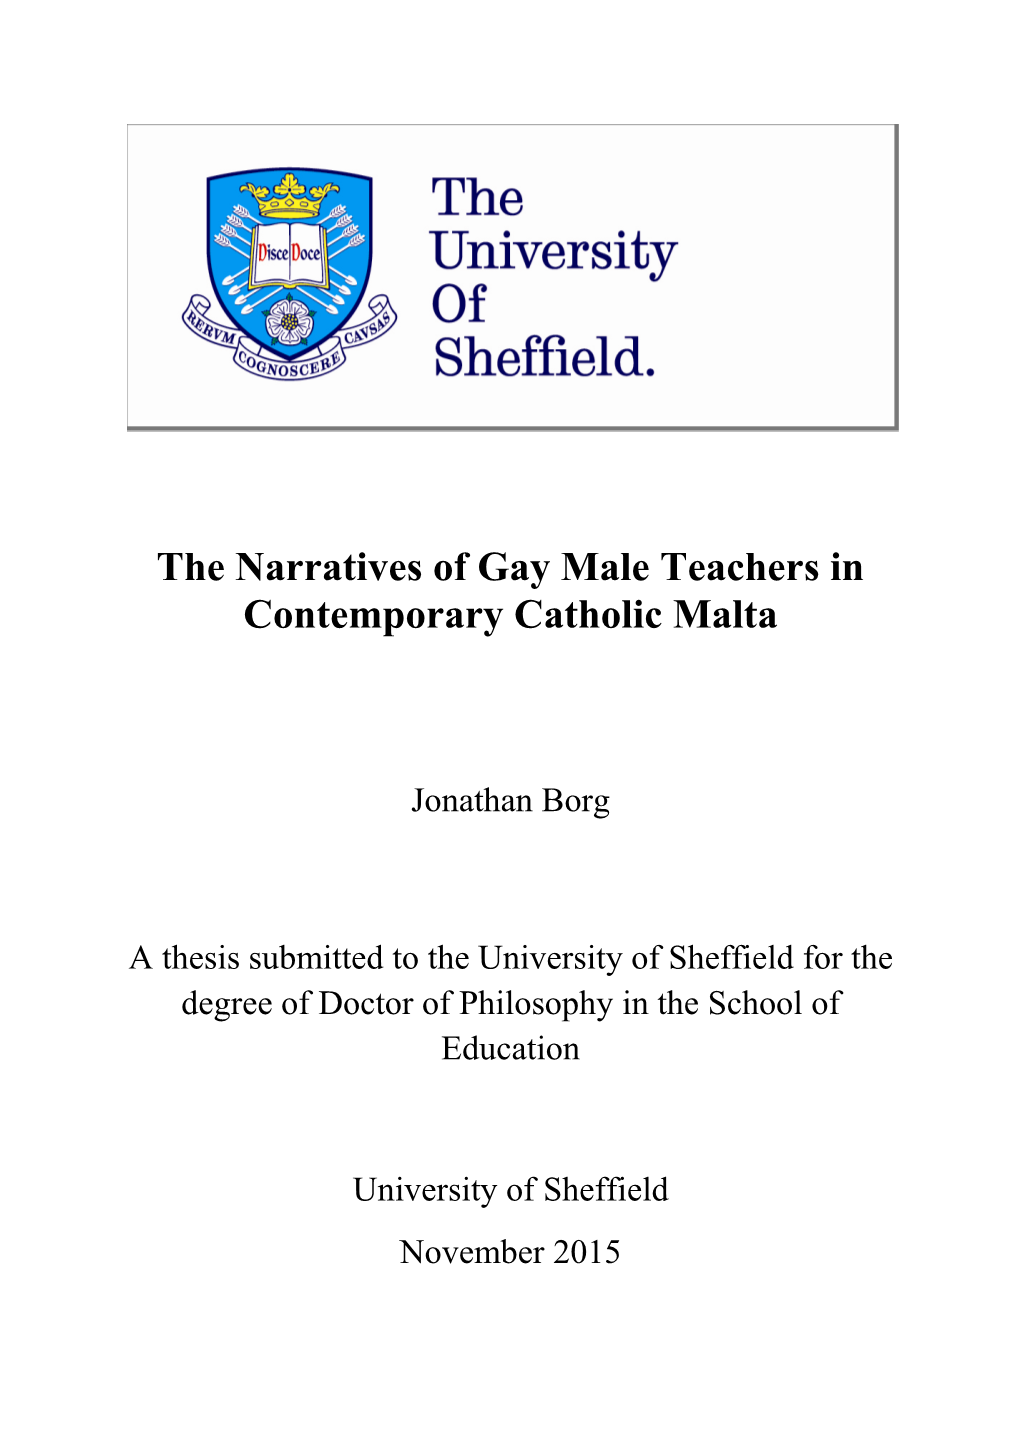 The Narratives of Gay Male Teachers in Contemporary Catholic Malta